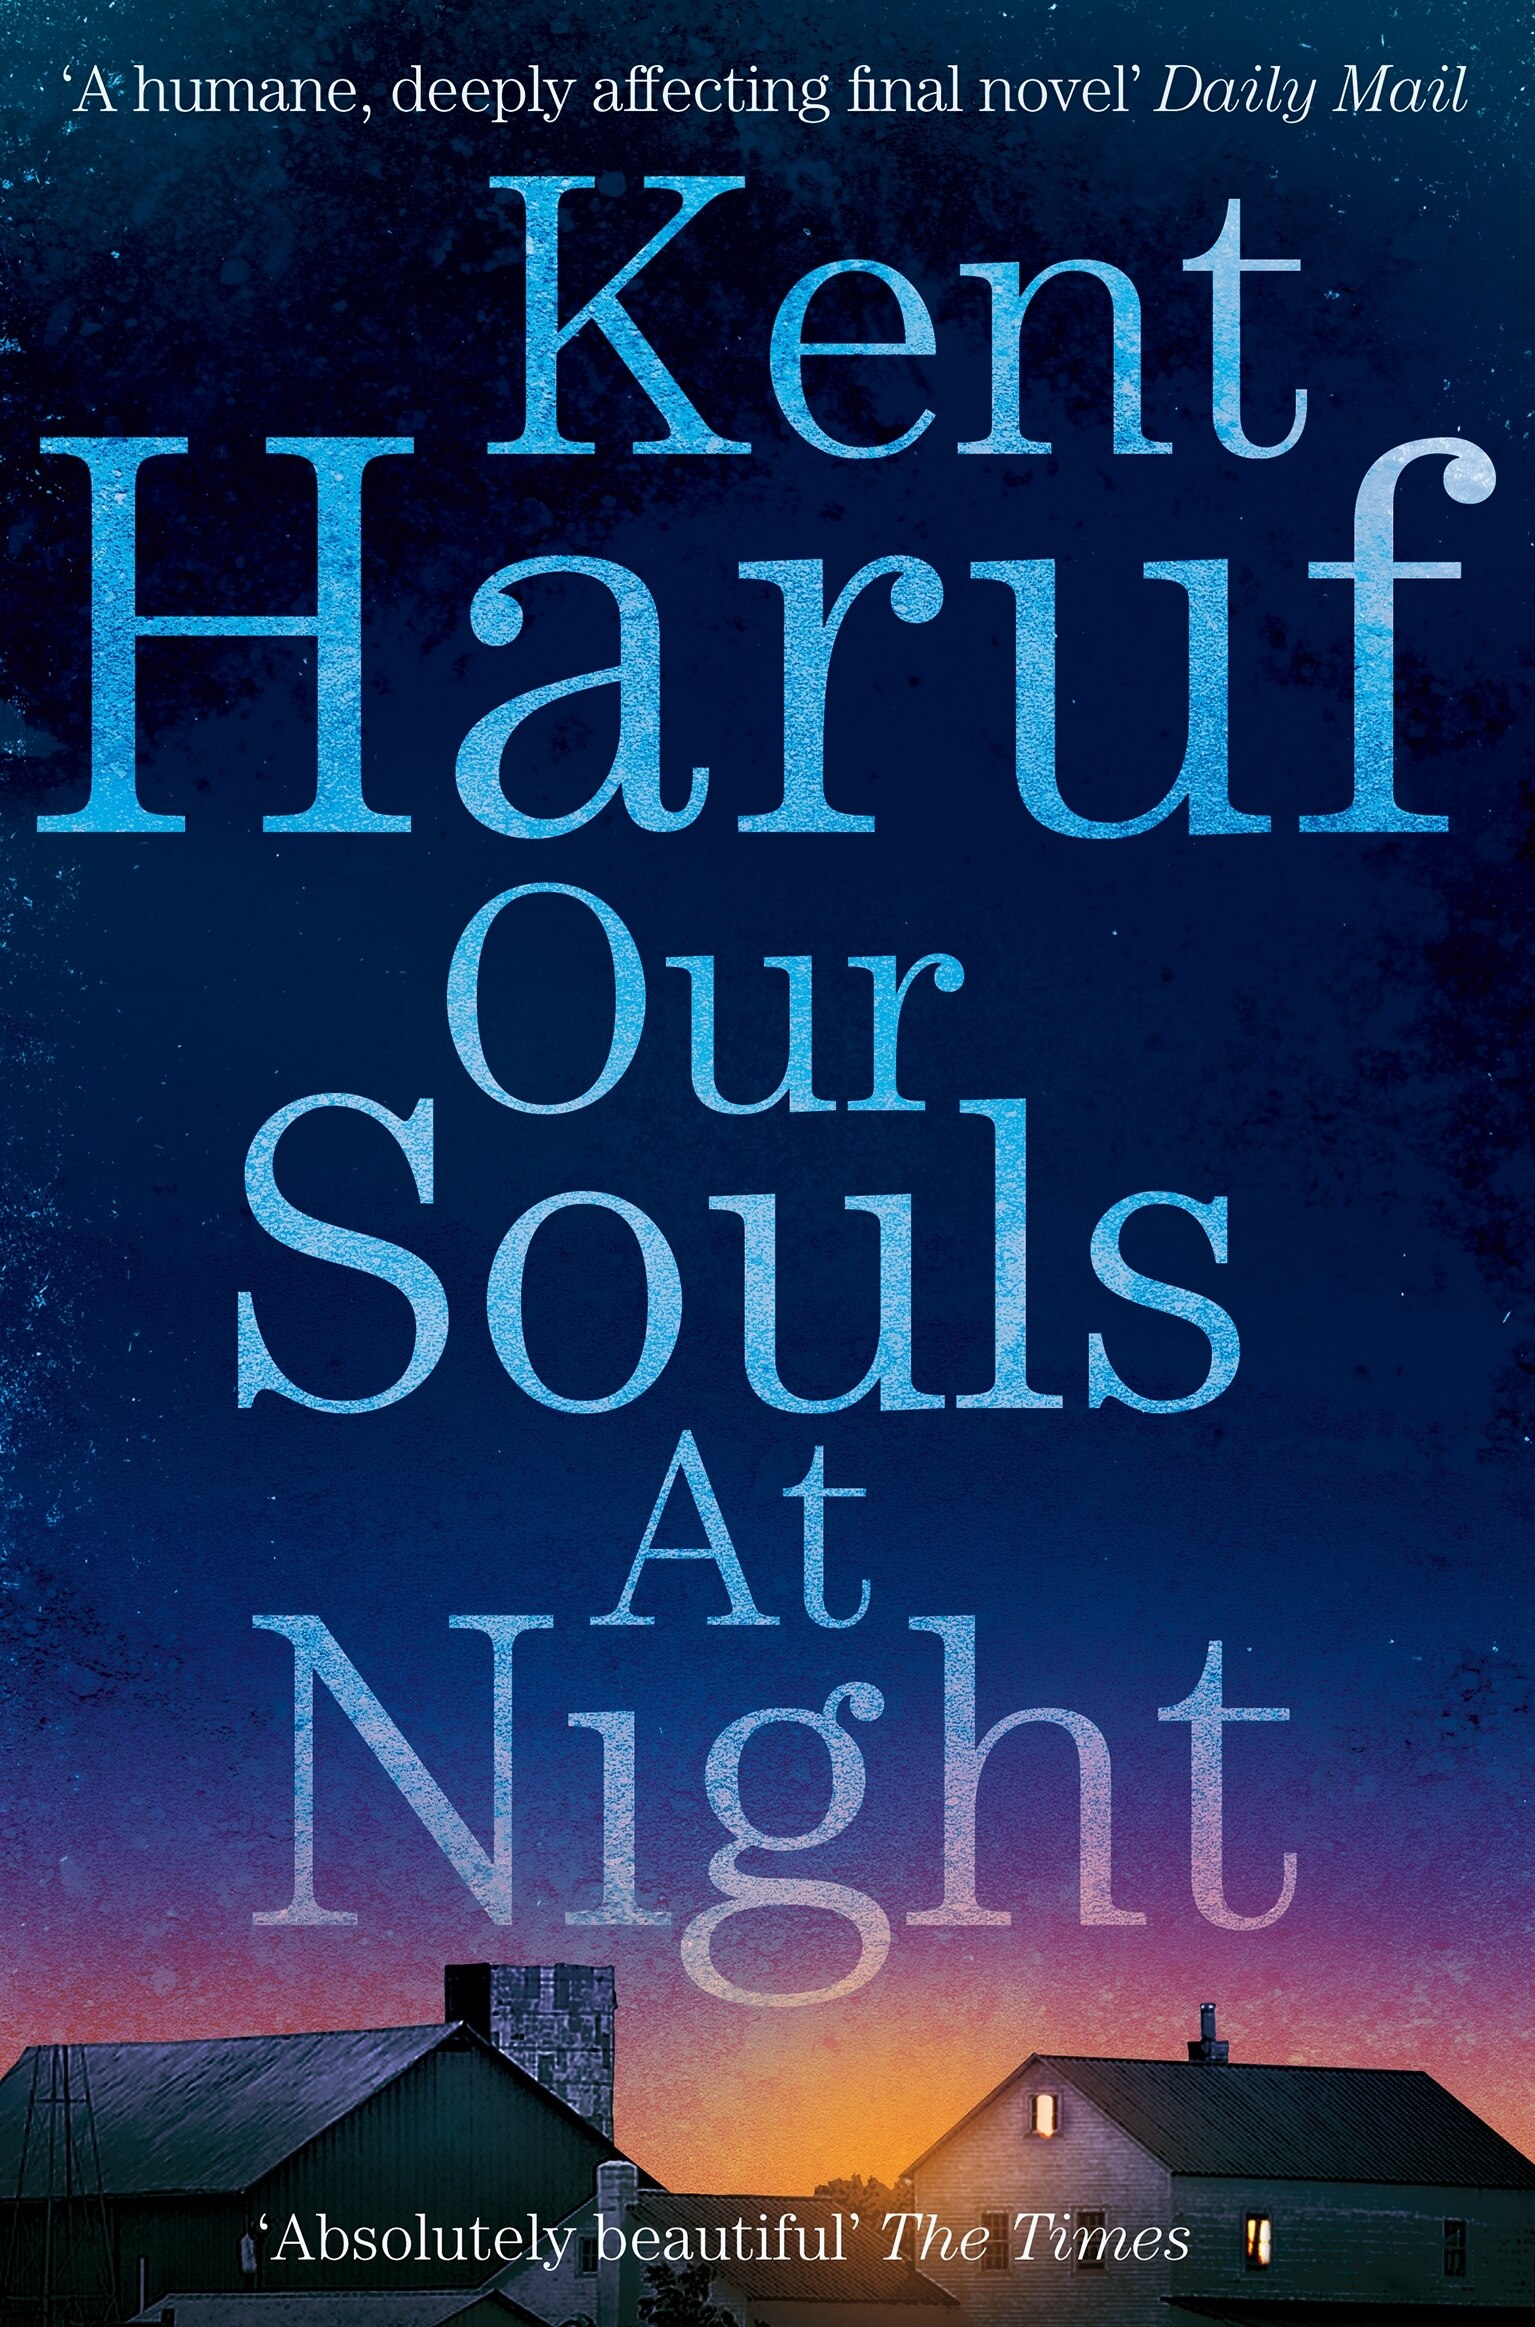 The cover of Kent Haruf's book Our Souls At Night, featuring an illustration of a dusky sky behind two rooftops